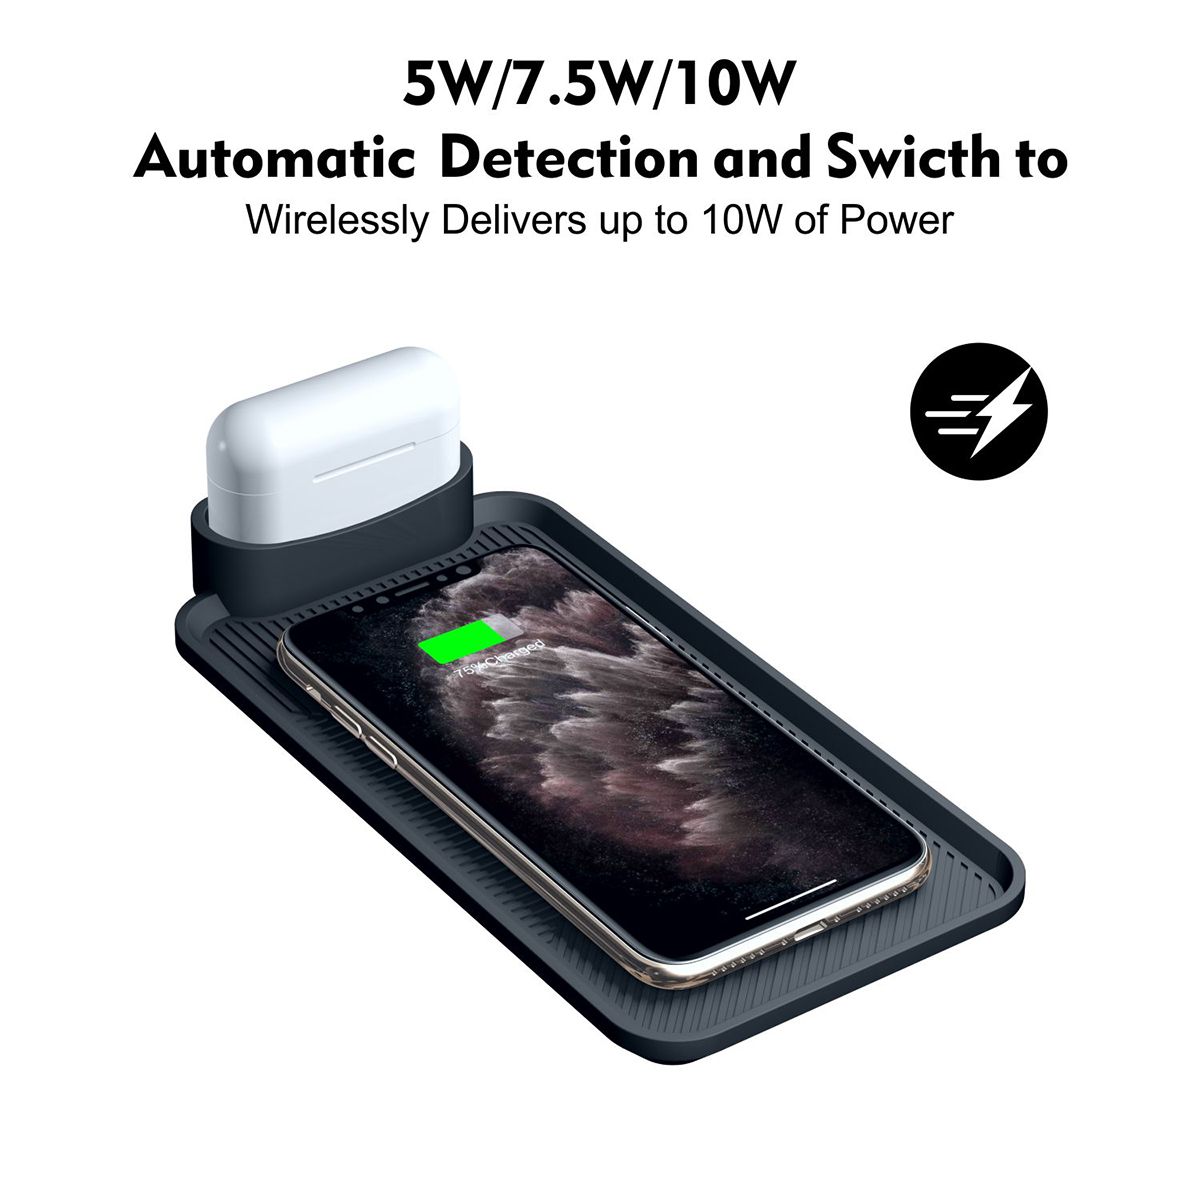 Universal-2-In-1-QI-Wireless-Car-Phone-Charger-Fast-Charging-For-Airpod-Phone-1745079